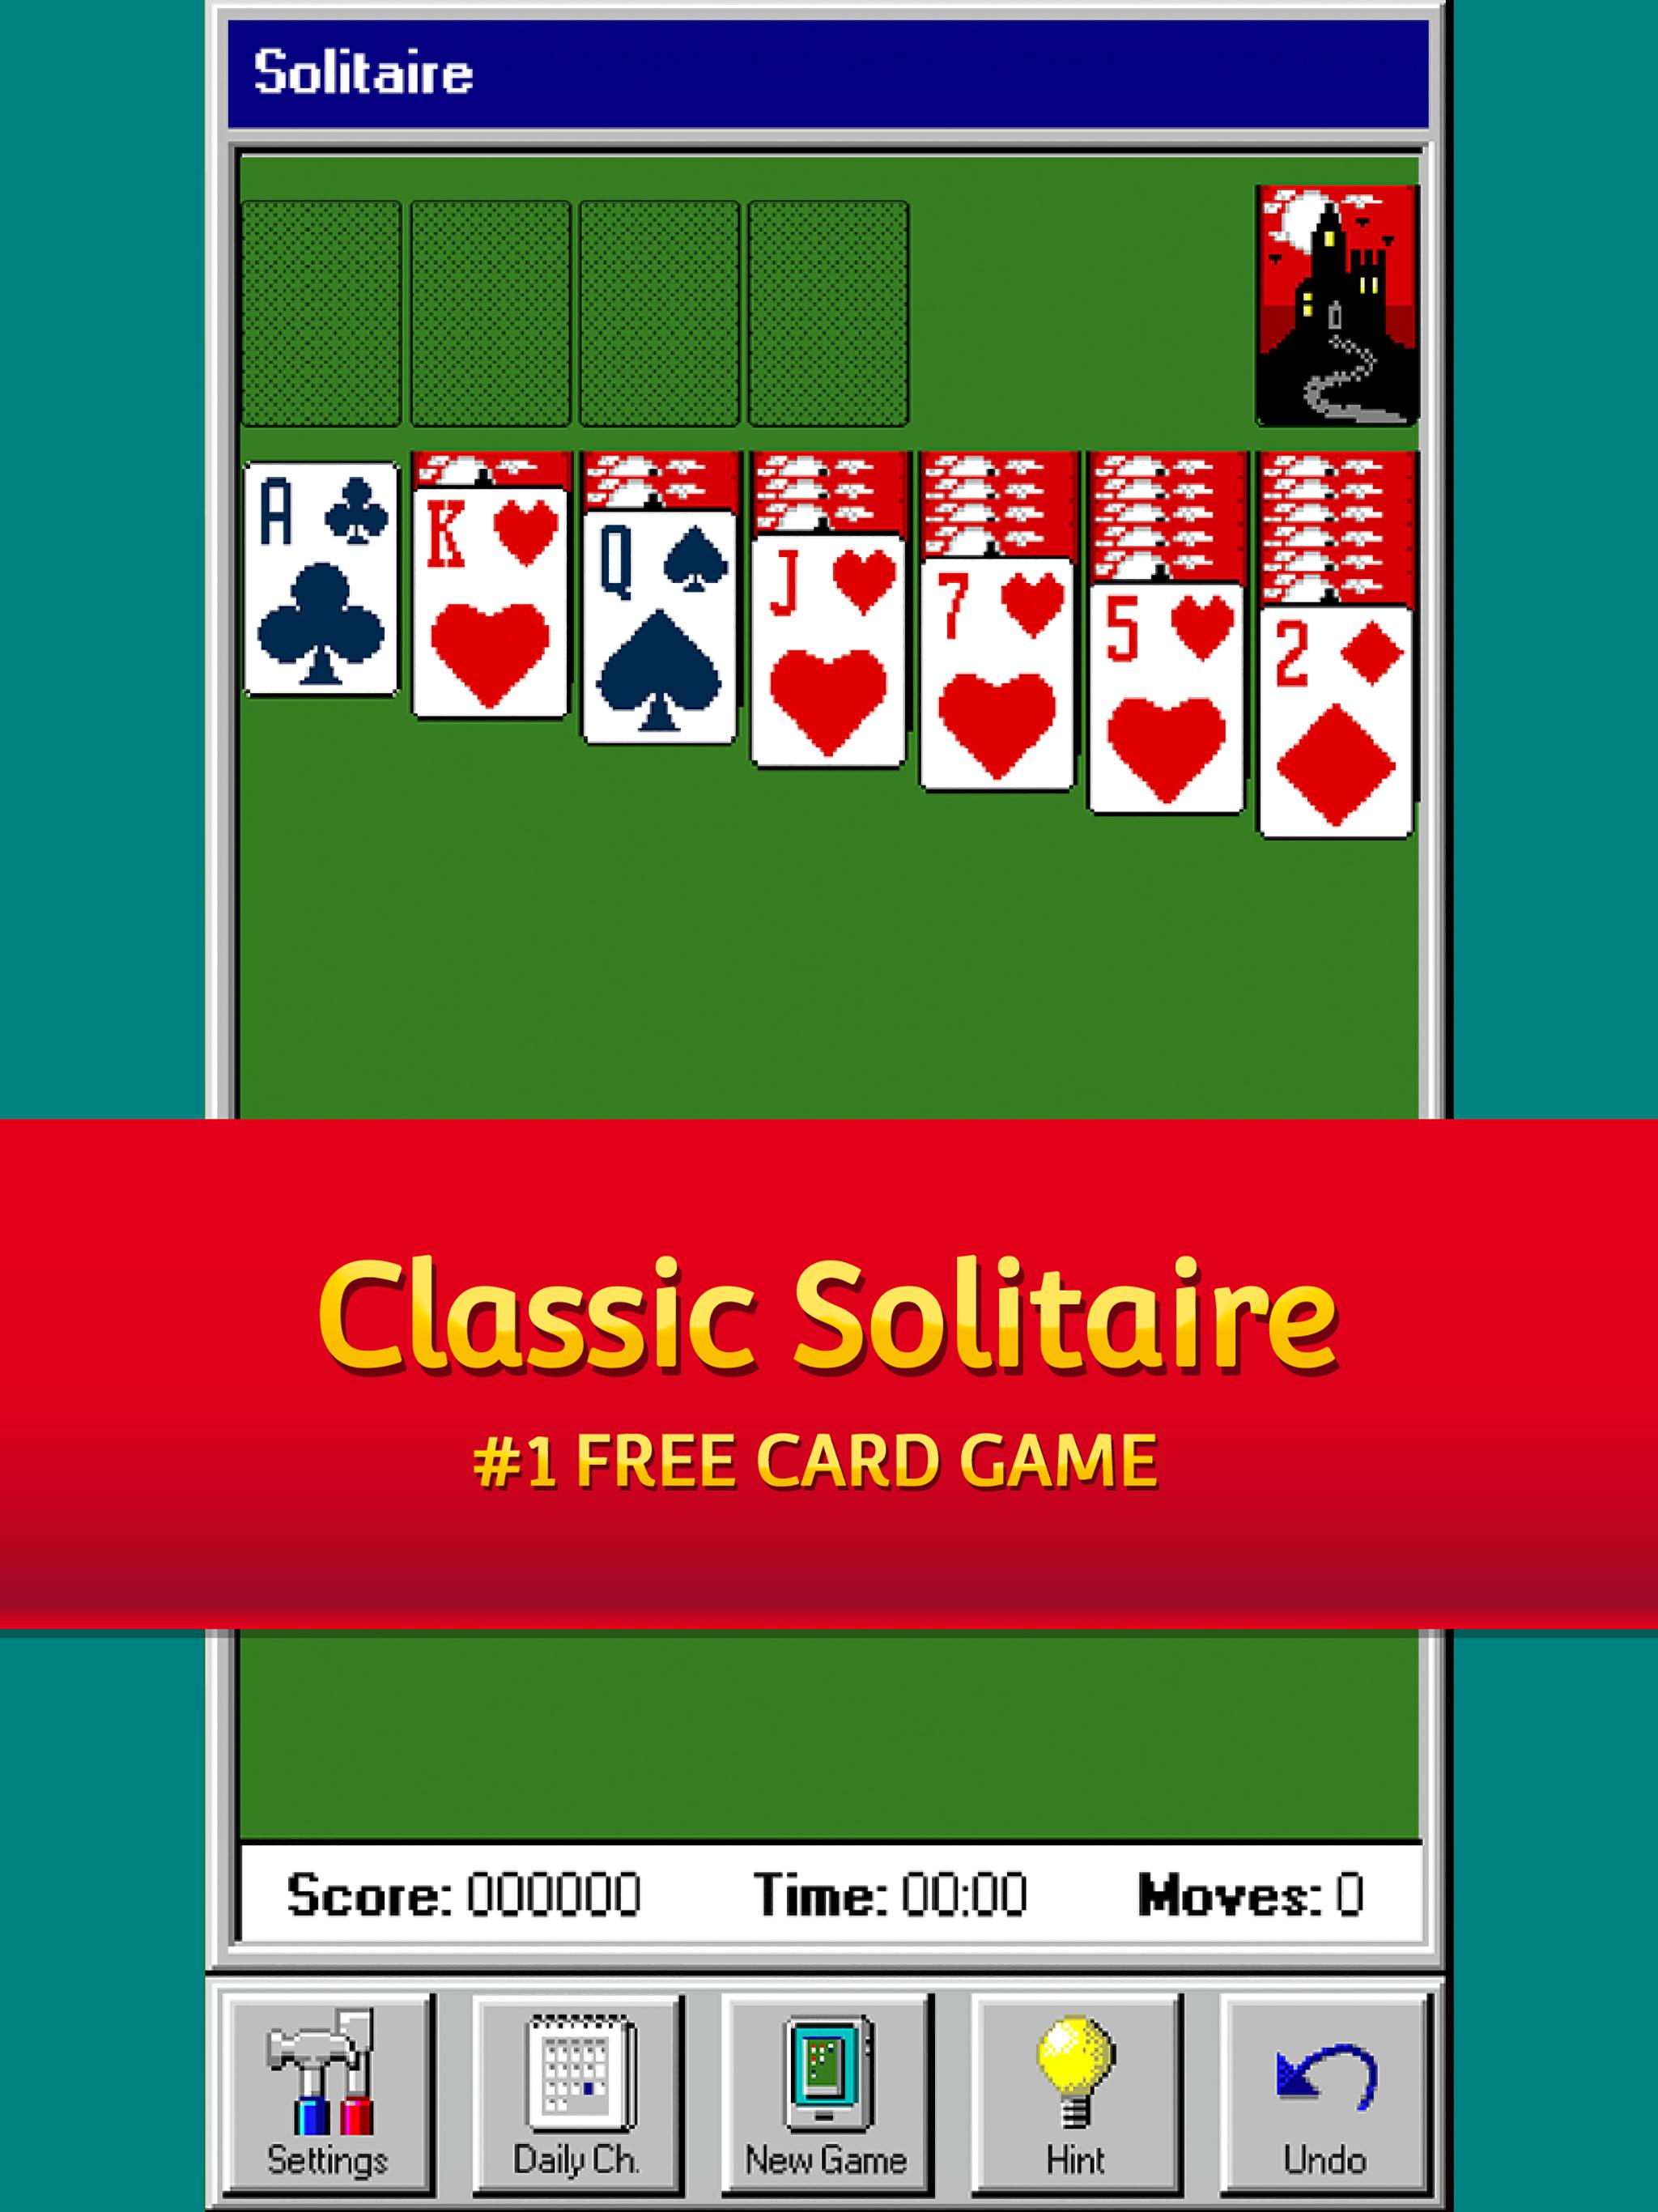 95 The classic Solitaire game for Android - APK Download